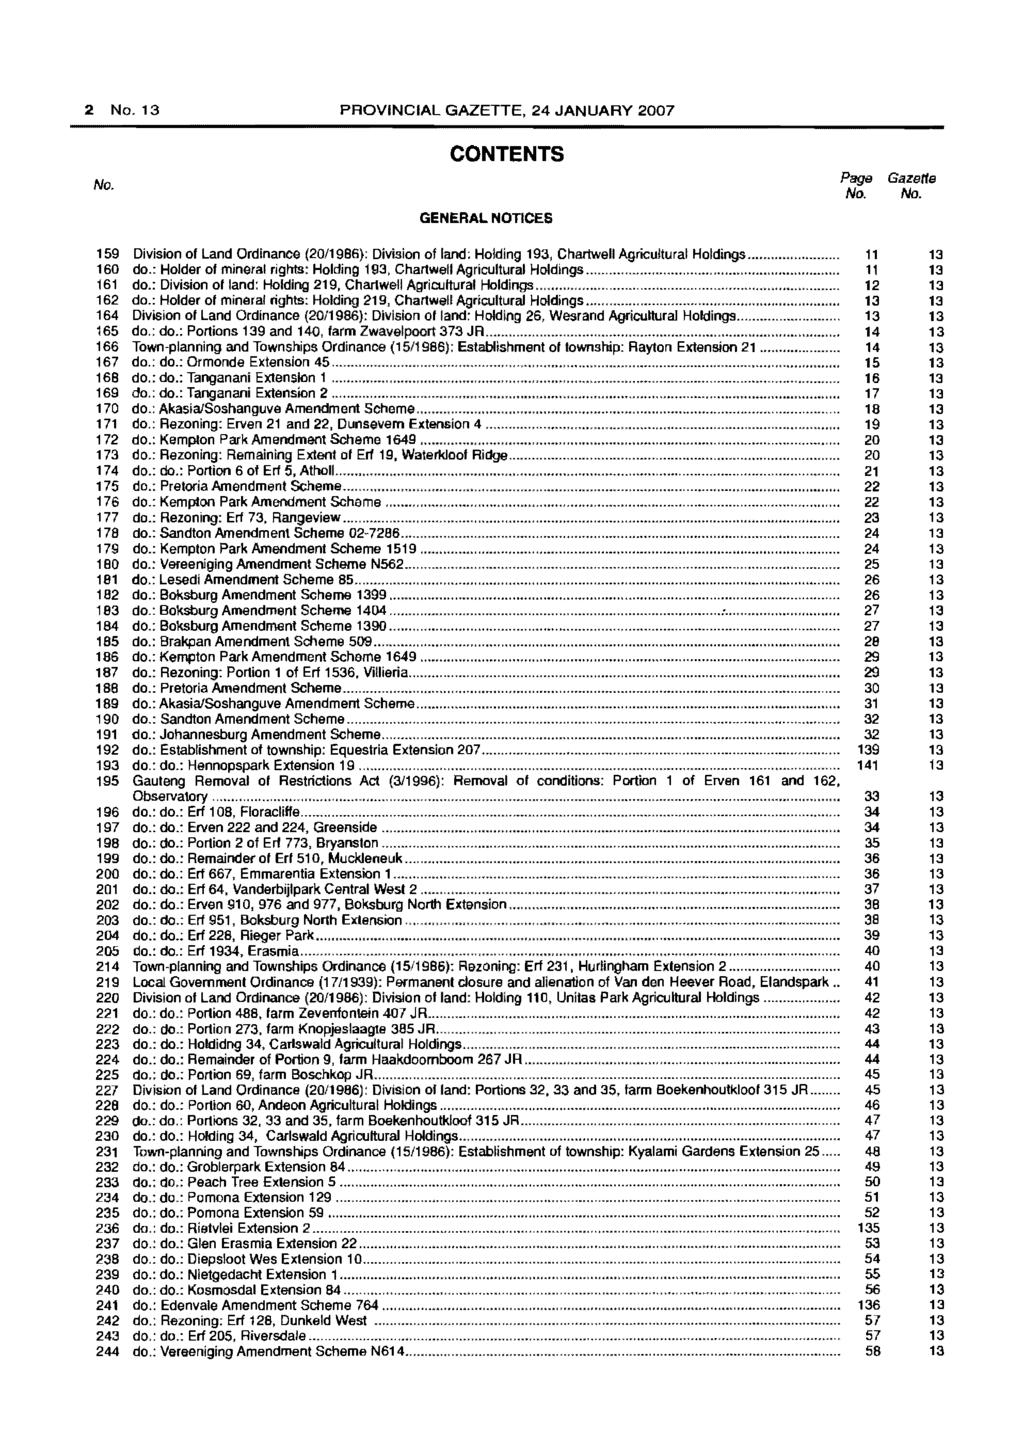 2 No.13 PROVINCIAL GAZETTE, 24 JANUARY 2007 No. CONTENTS Page No. Gazelle NIl. GENERAL NOTICES 159 Division of Land Ordinance (20/1986): Division of land: Holding 193, Chartwall Agricultural Holdings.